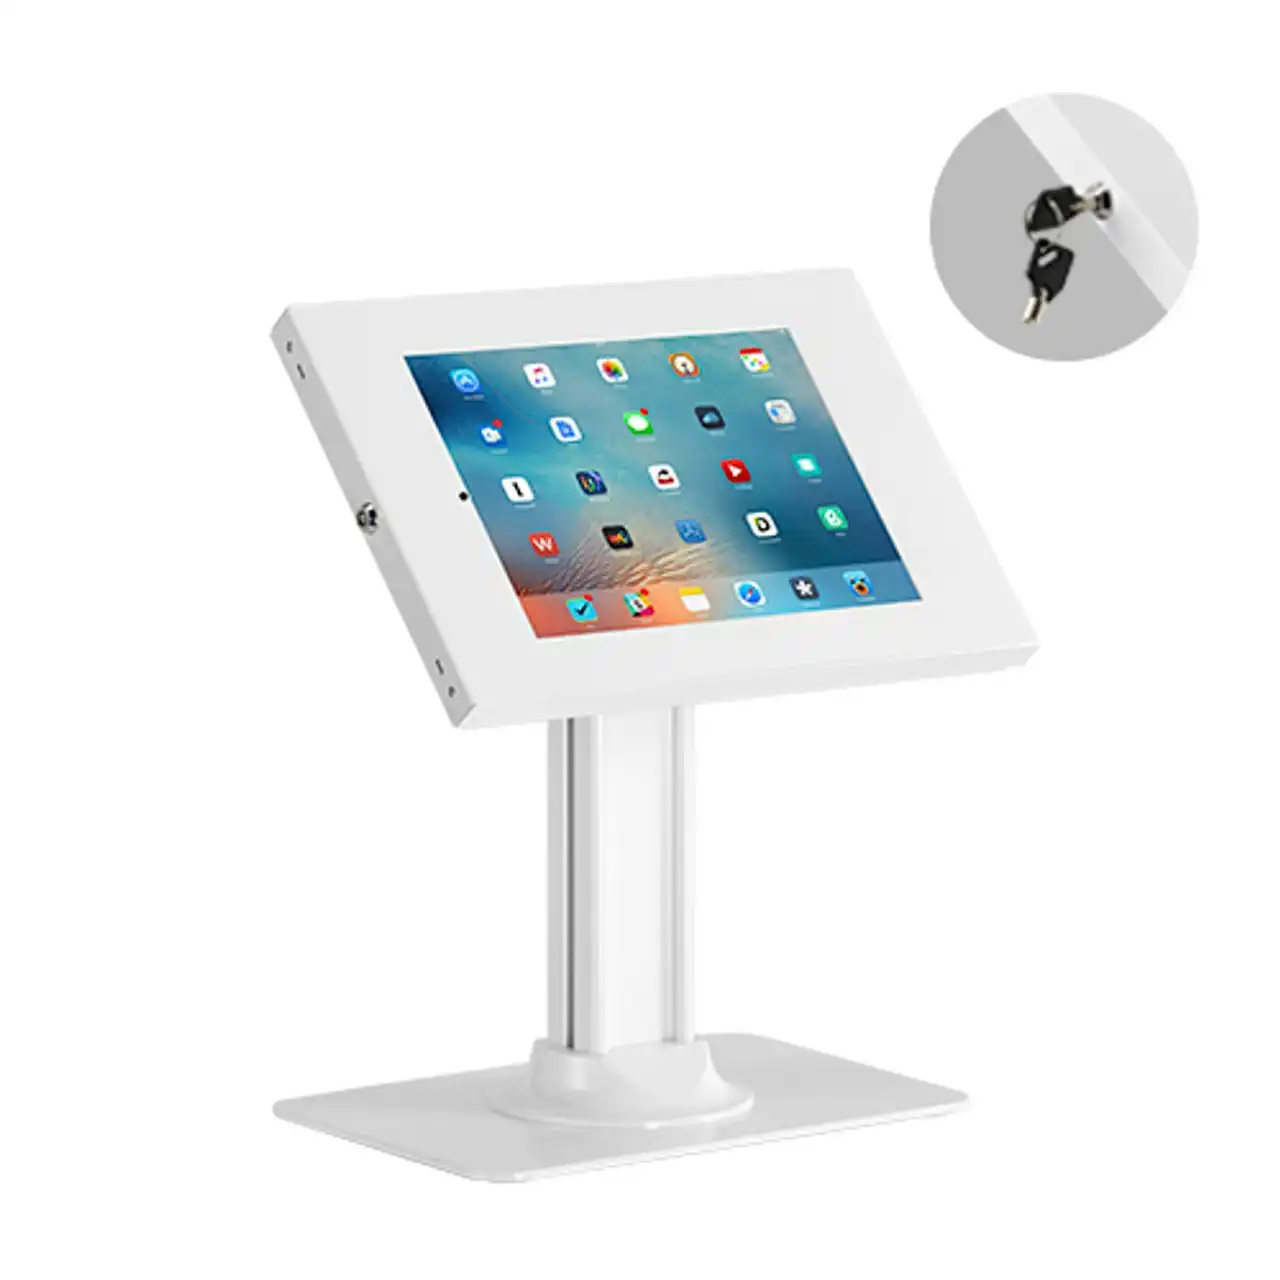 Brateck Anti-theft Countertop Tablet Holder 9.7  To 11  - White